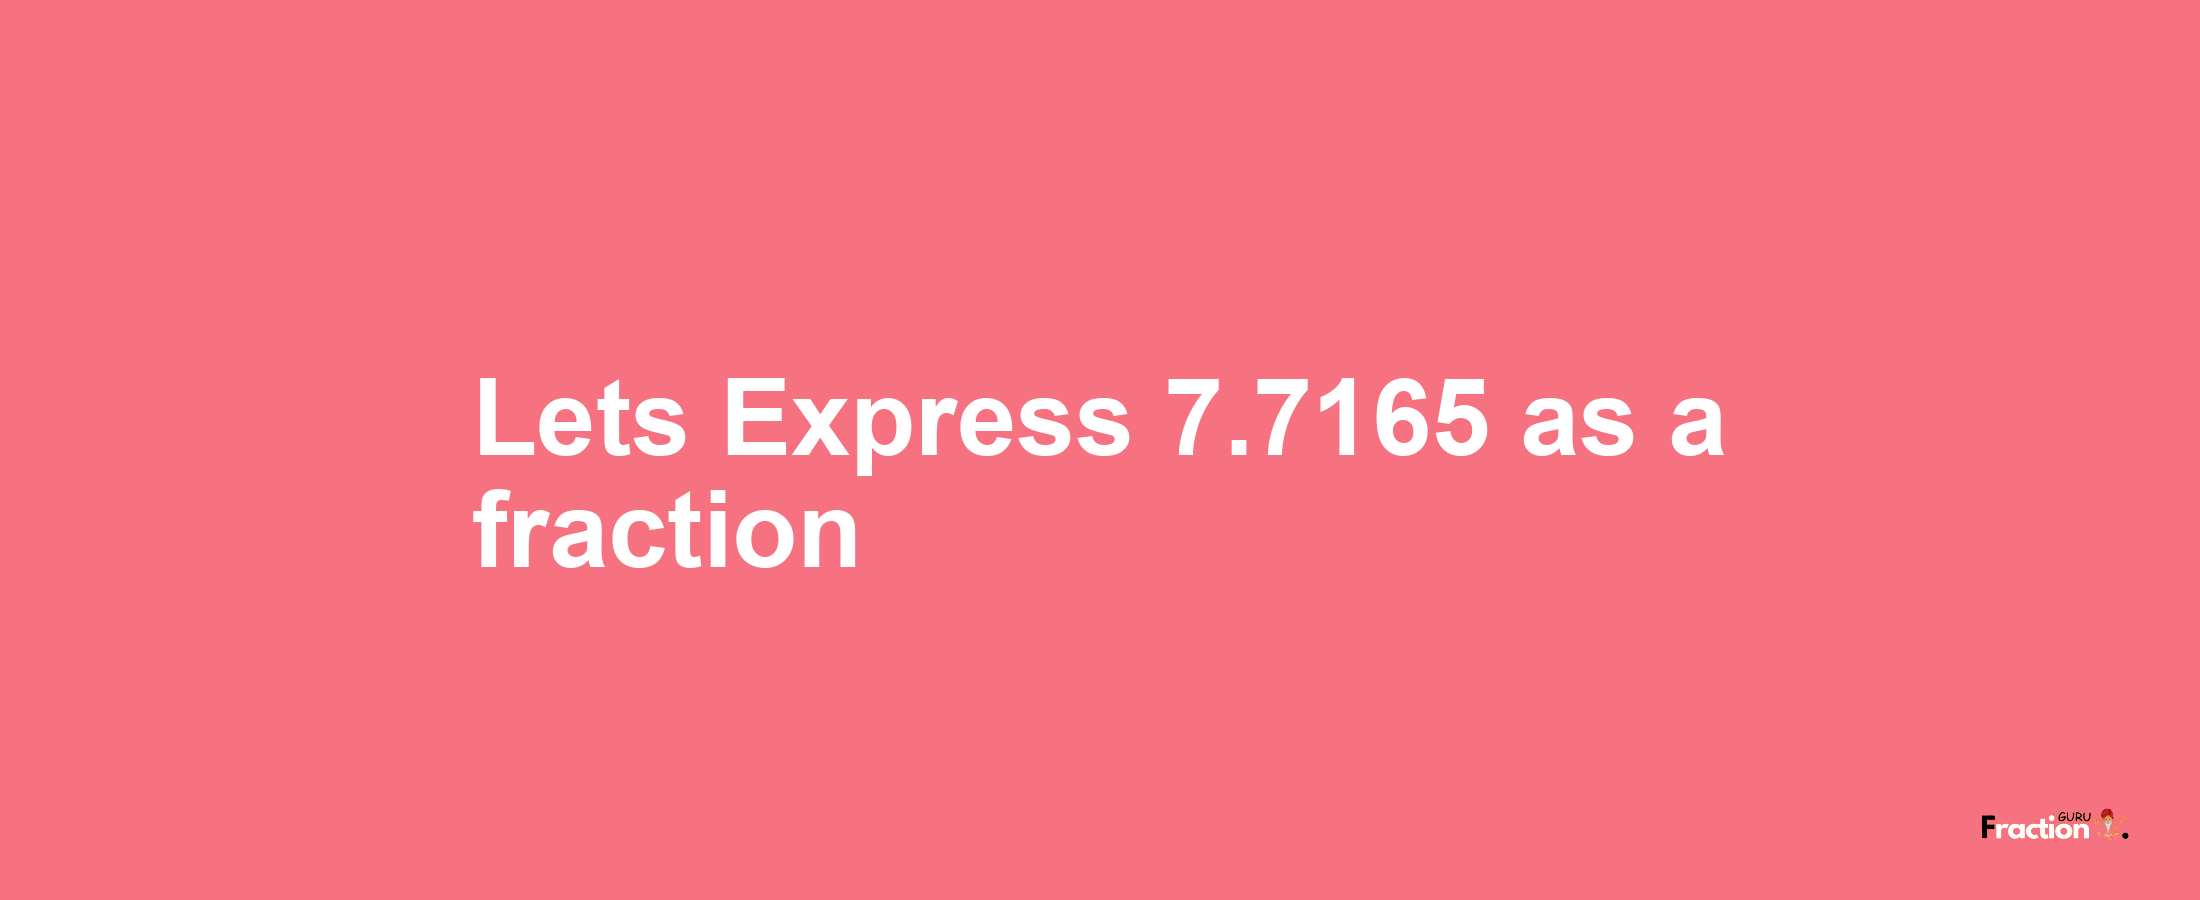 Lets Express 7.7165 as afraction